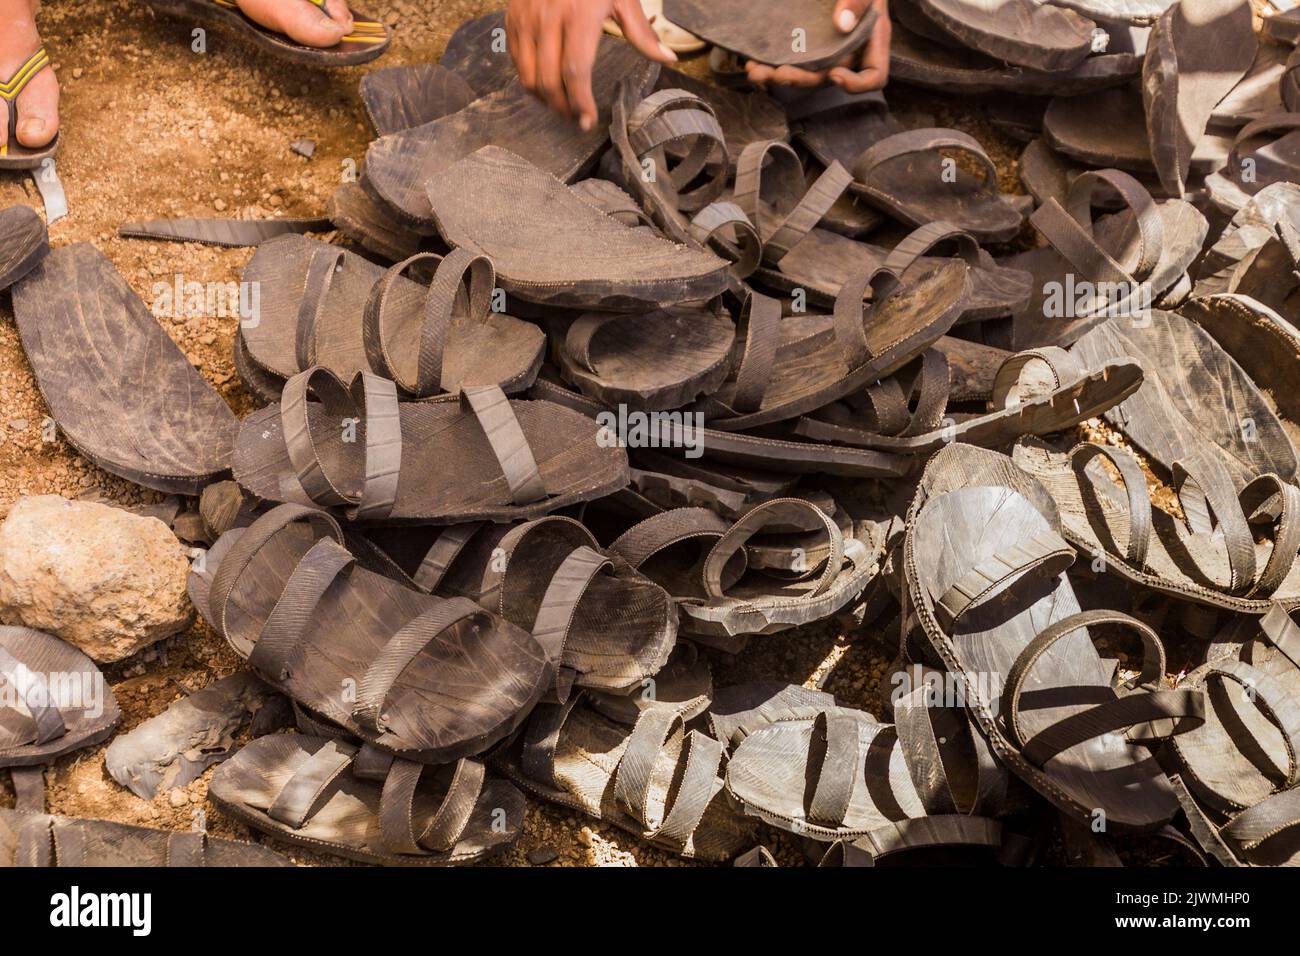 Sandals made of old tires at the Saturday market in Lalibela, Ethiopia Stock Photo